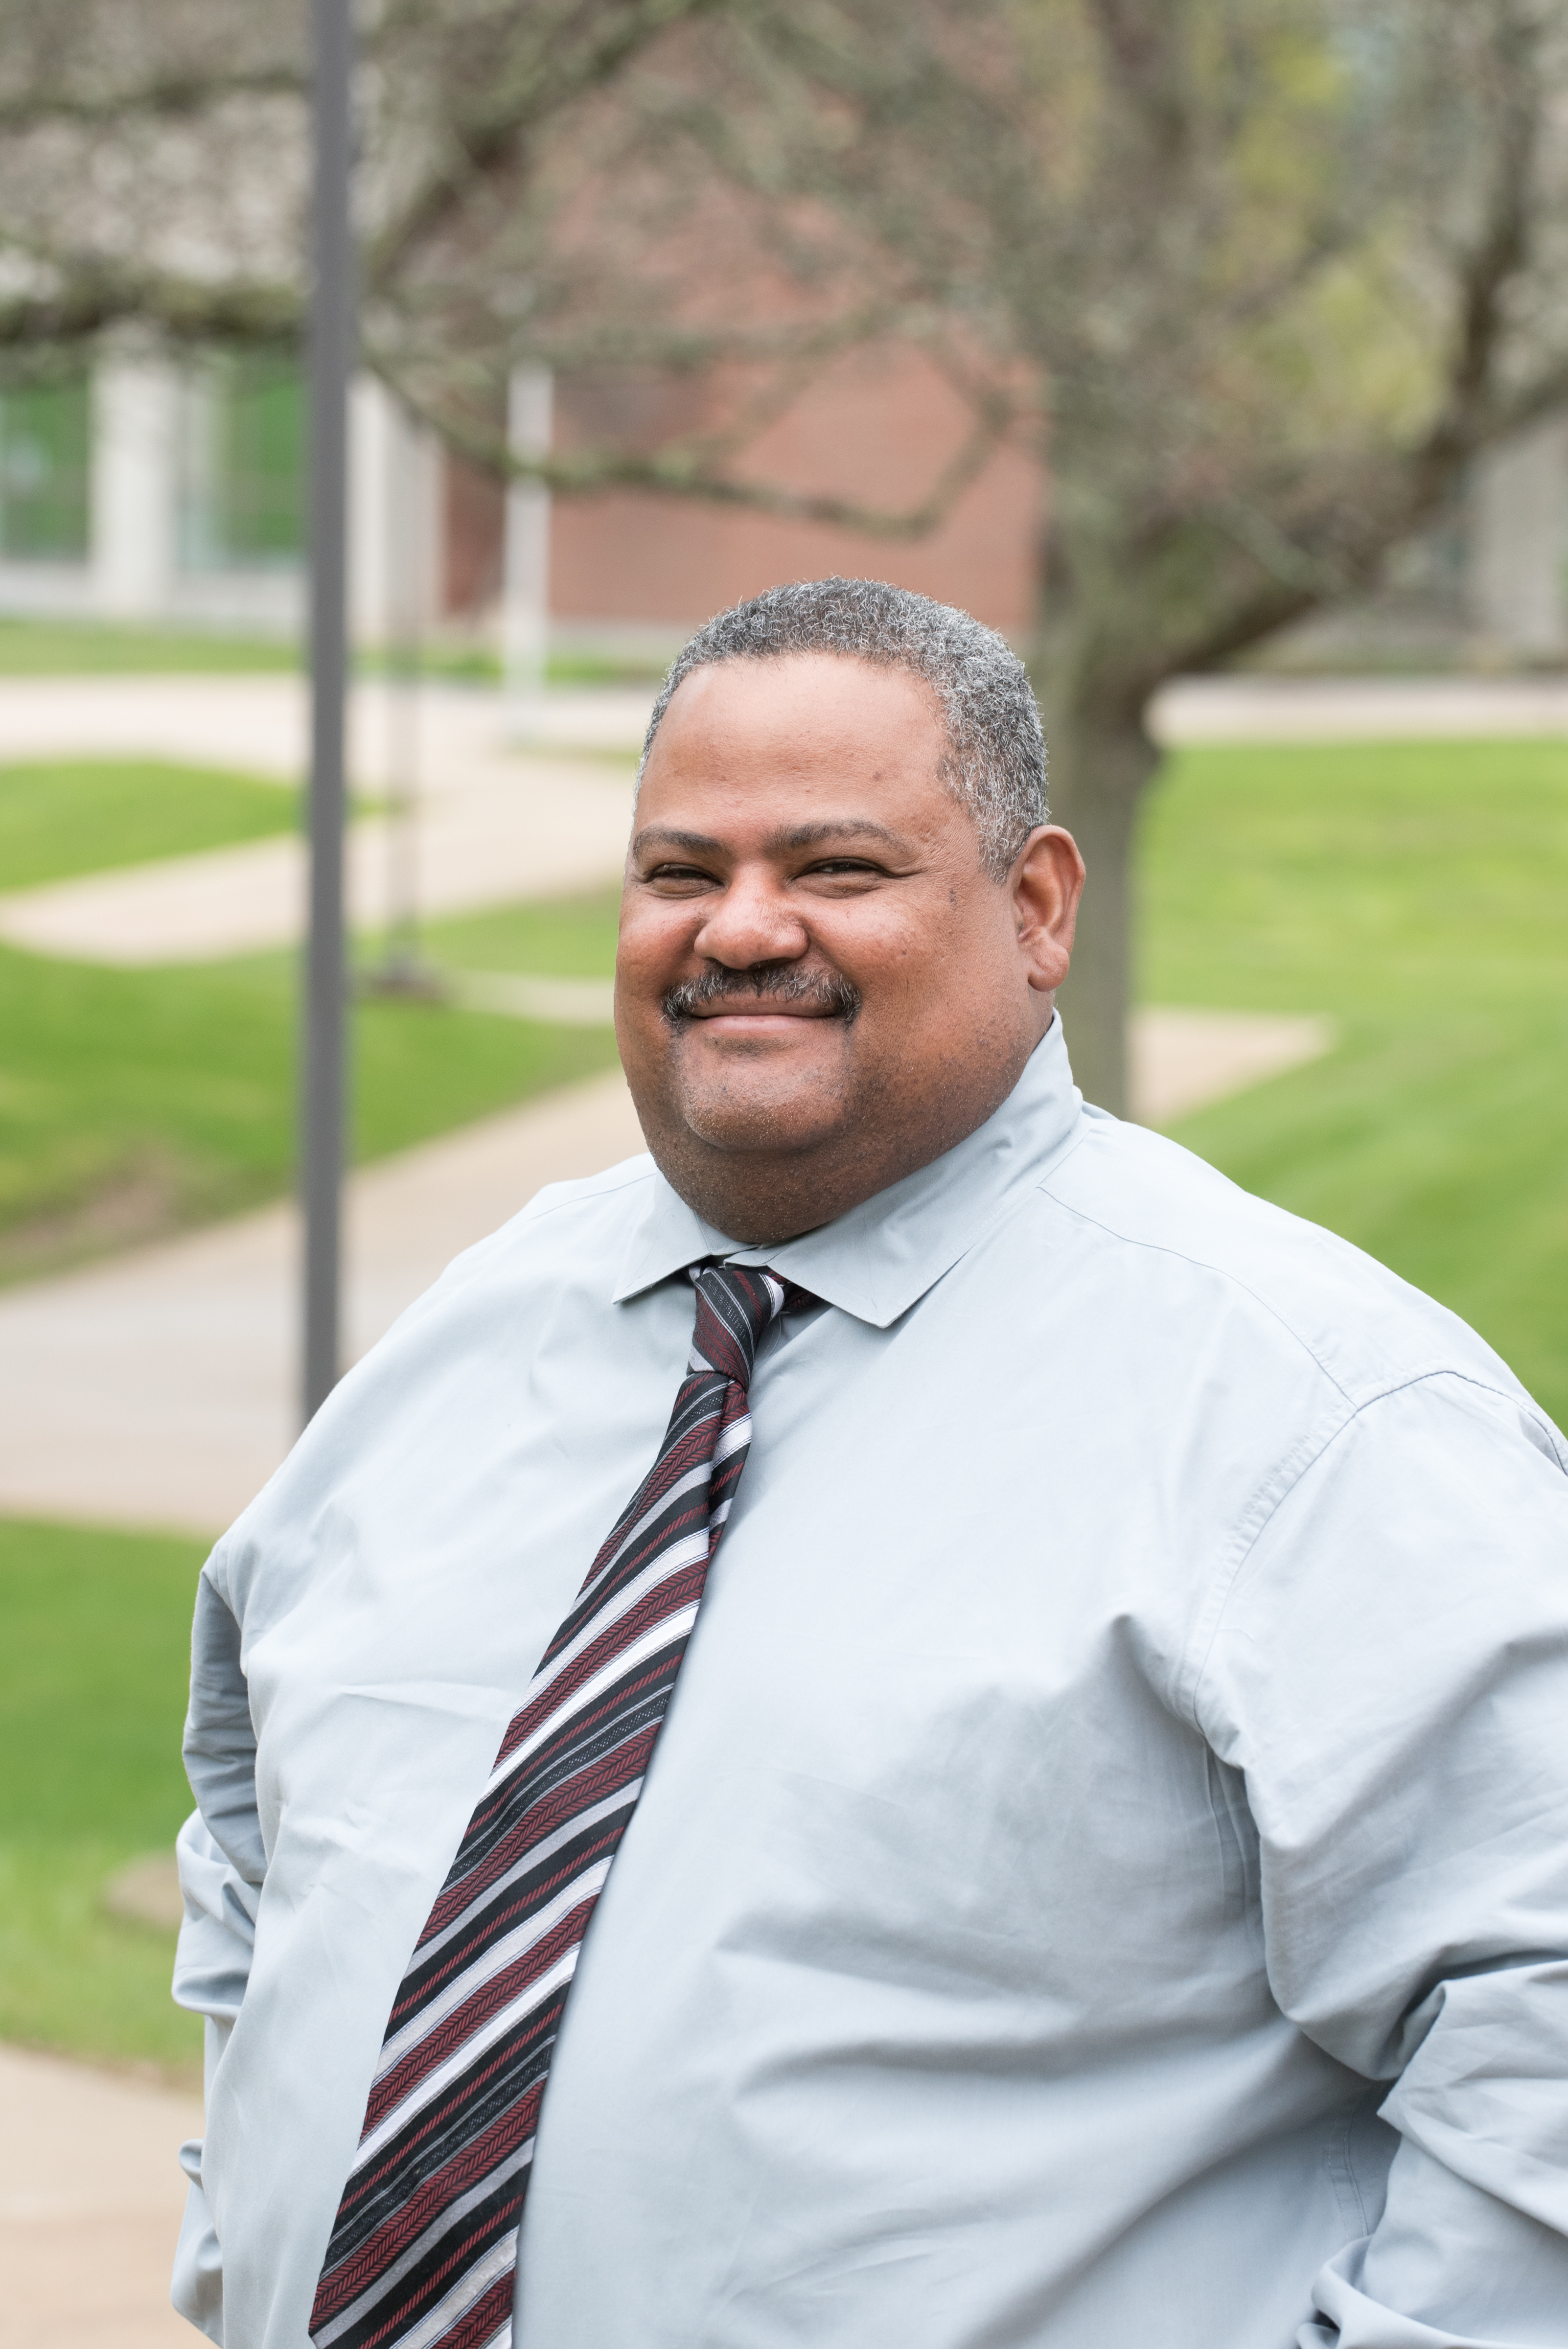 Decades in the Making Lawrence Man Earns Associate Degree - Northern Essex